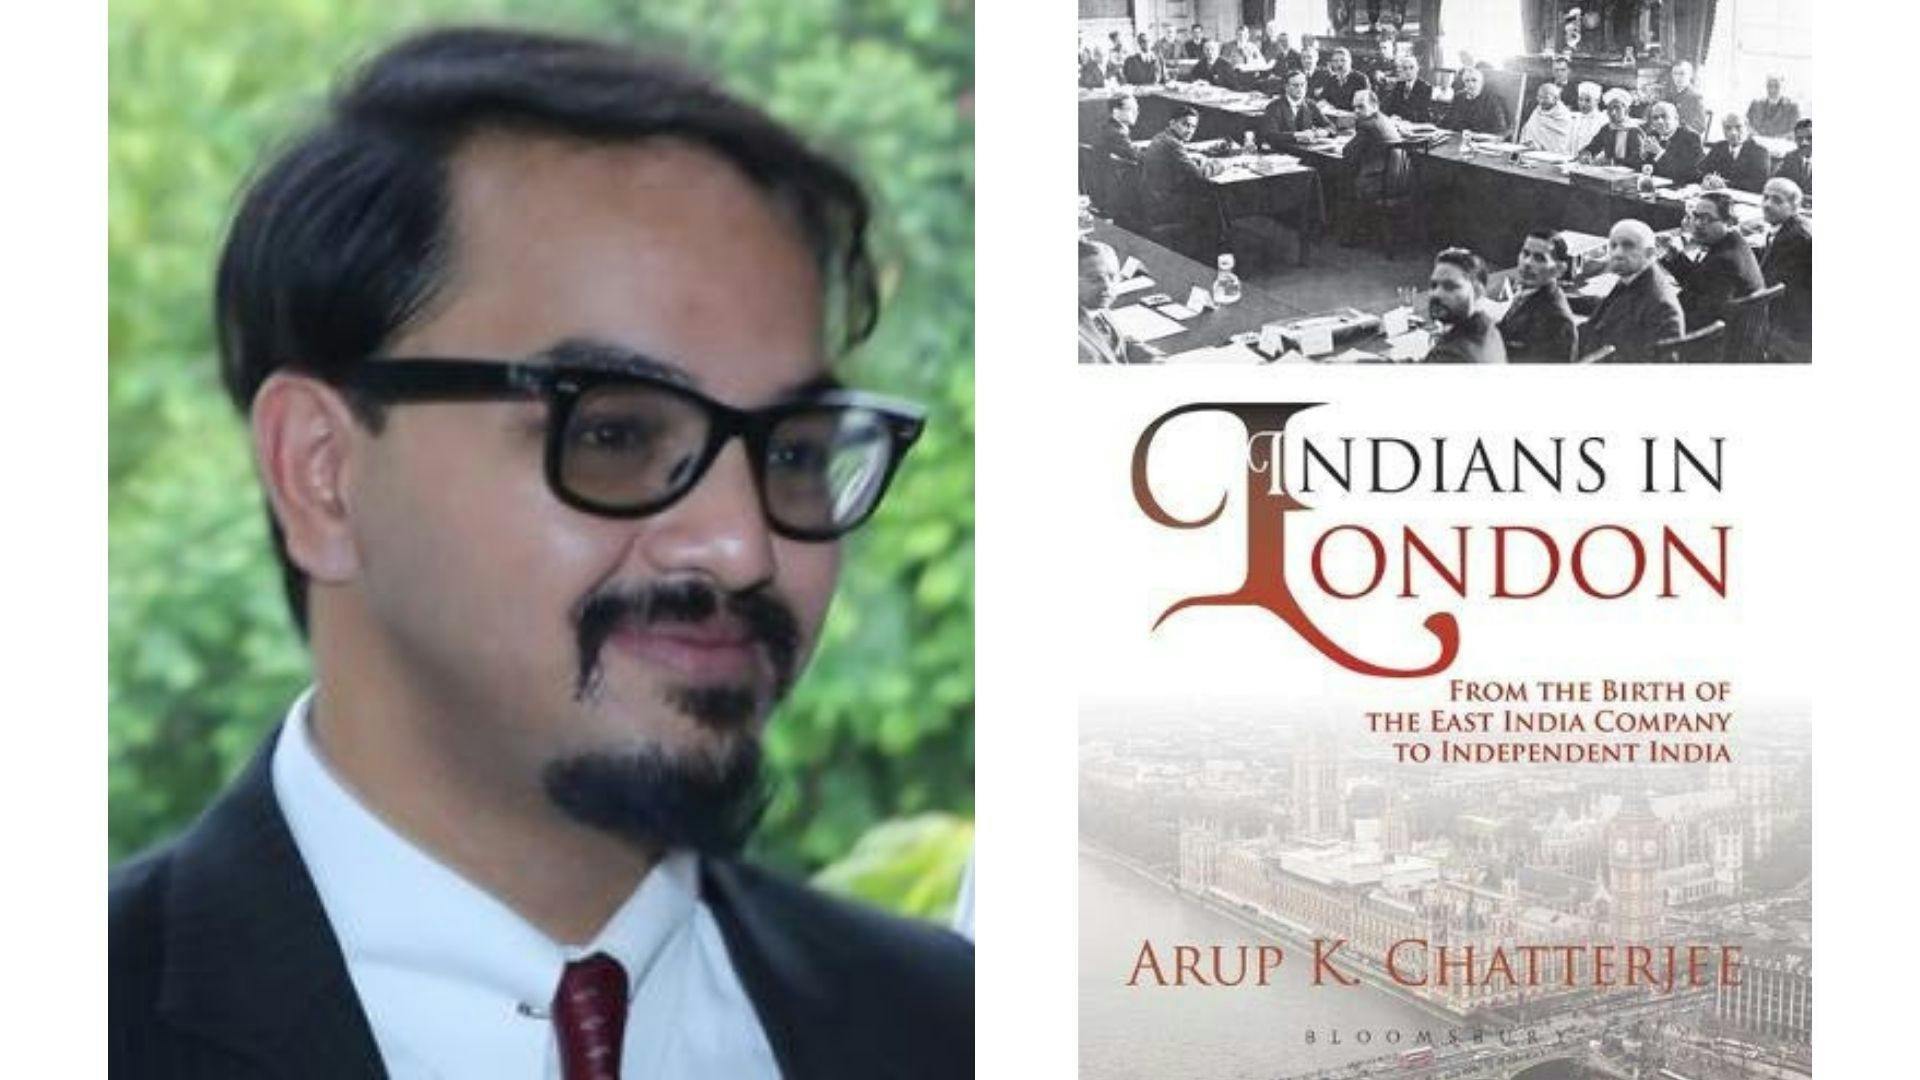 Author Arup K Chatterjee and the book cover